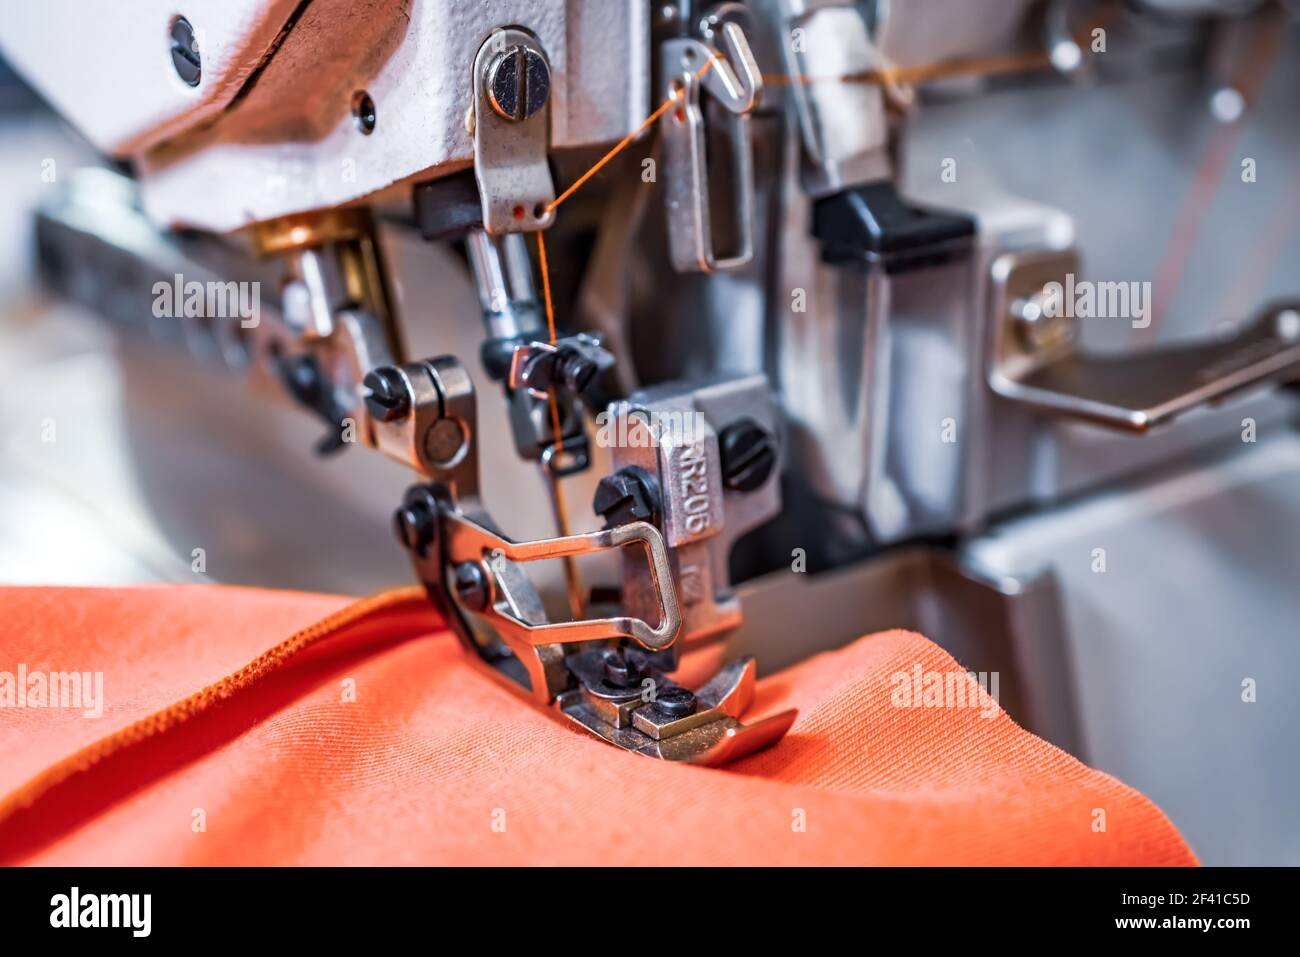 Professional sewing machine close-up. Modern textile industry. Stock Photo